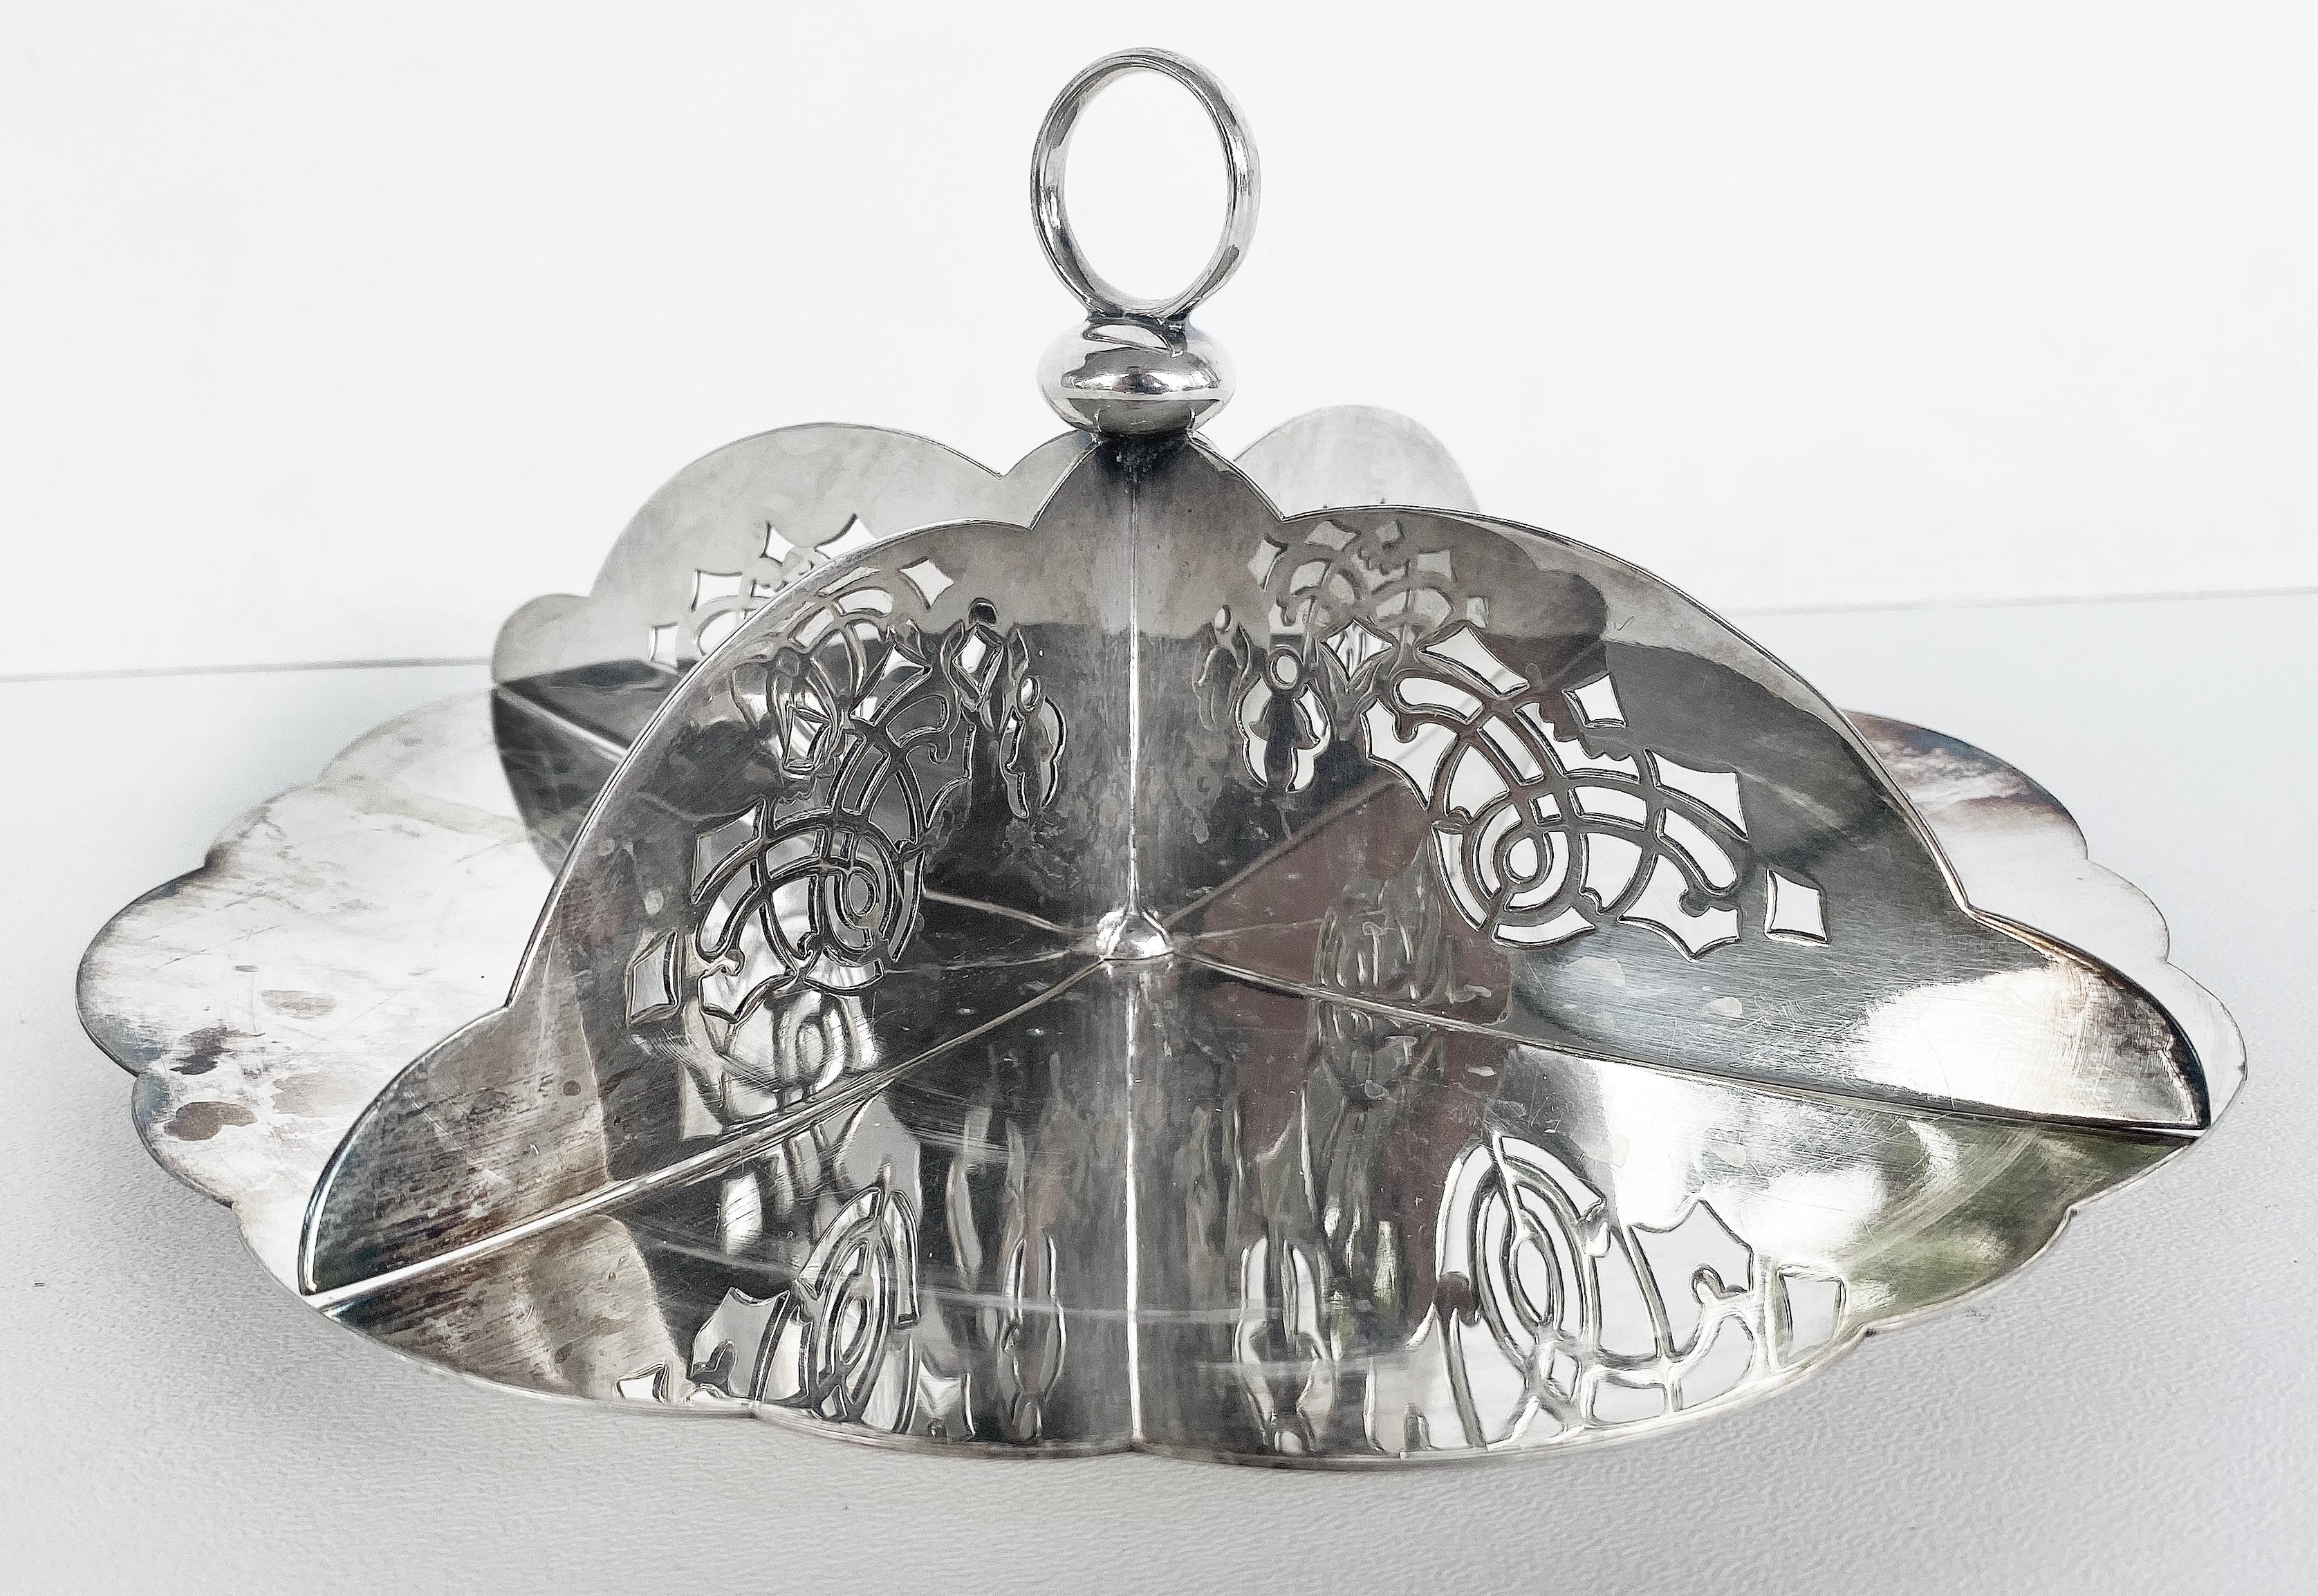 English Sheffield Mapping & Webb's Prince's plate silver serving piece

Offered for sale is an English Sheffield silver Mapping & Webb's prince's plate. Fully hallmarked in the base, this wonderful serving piece has four compartments separated by